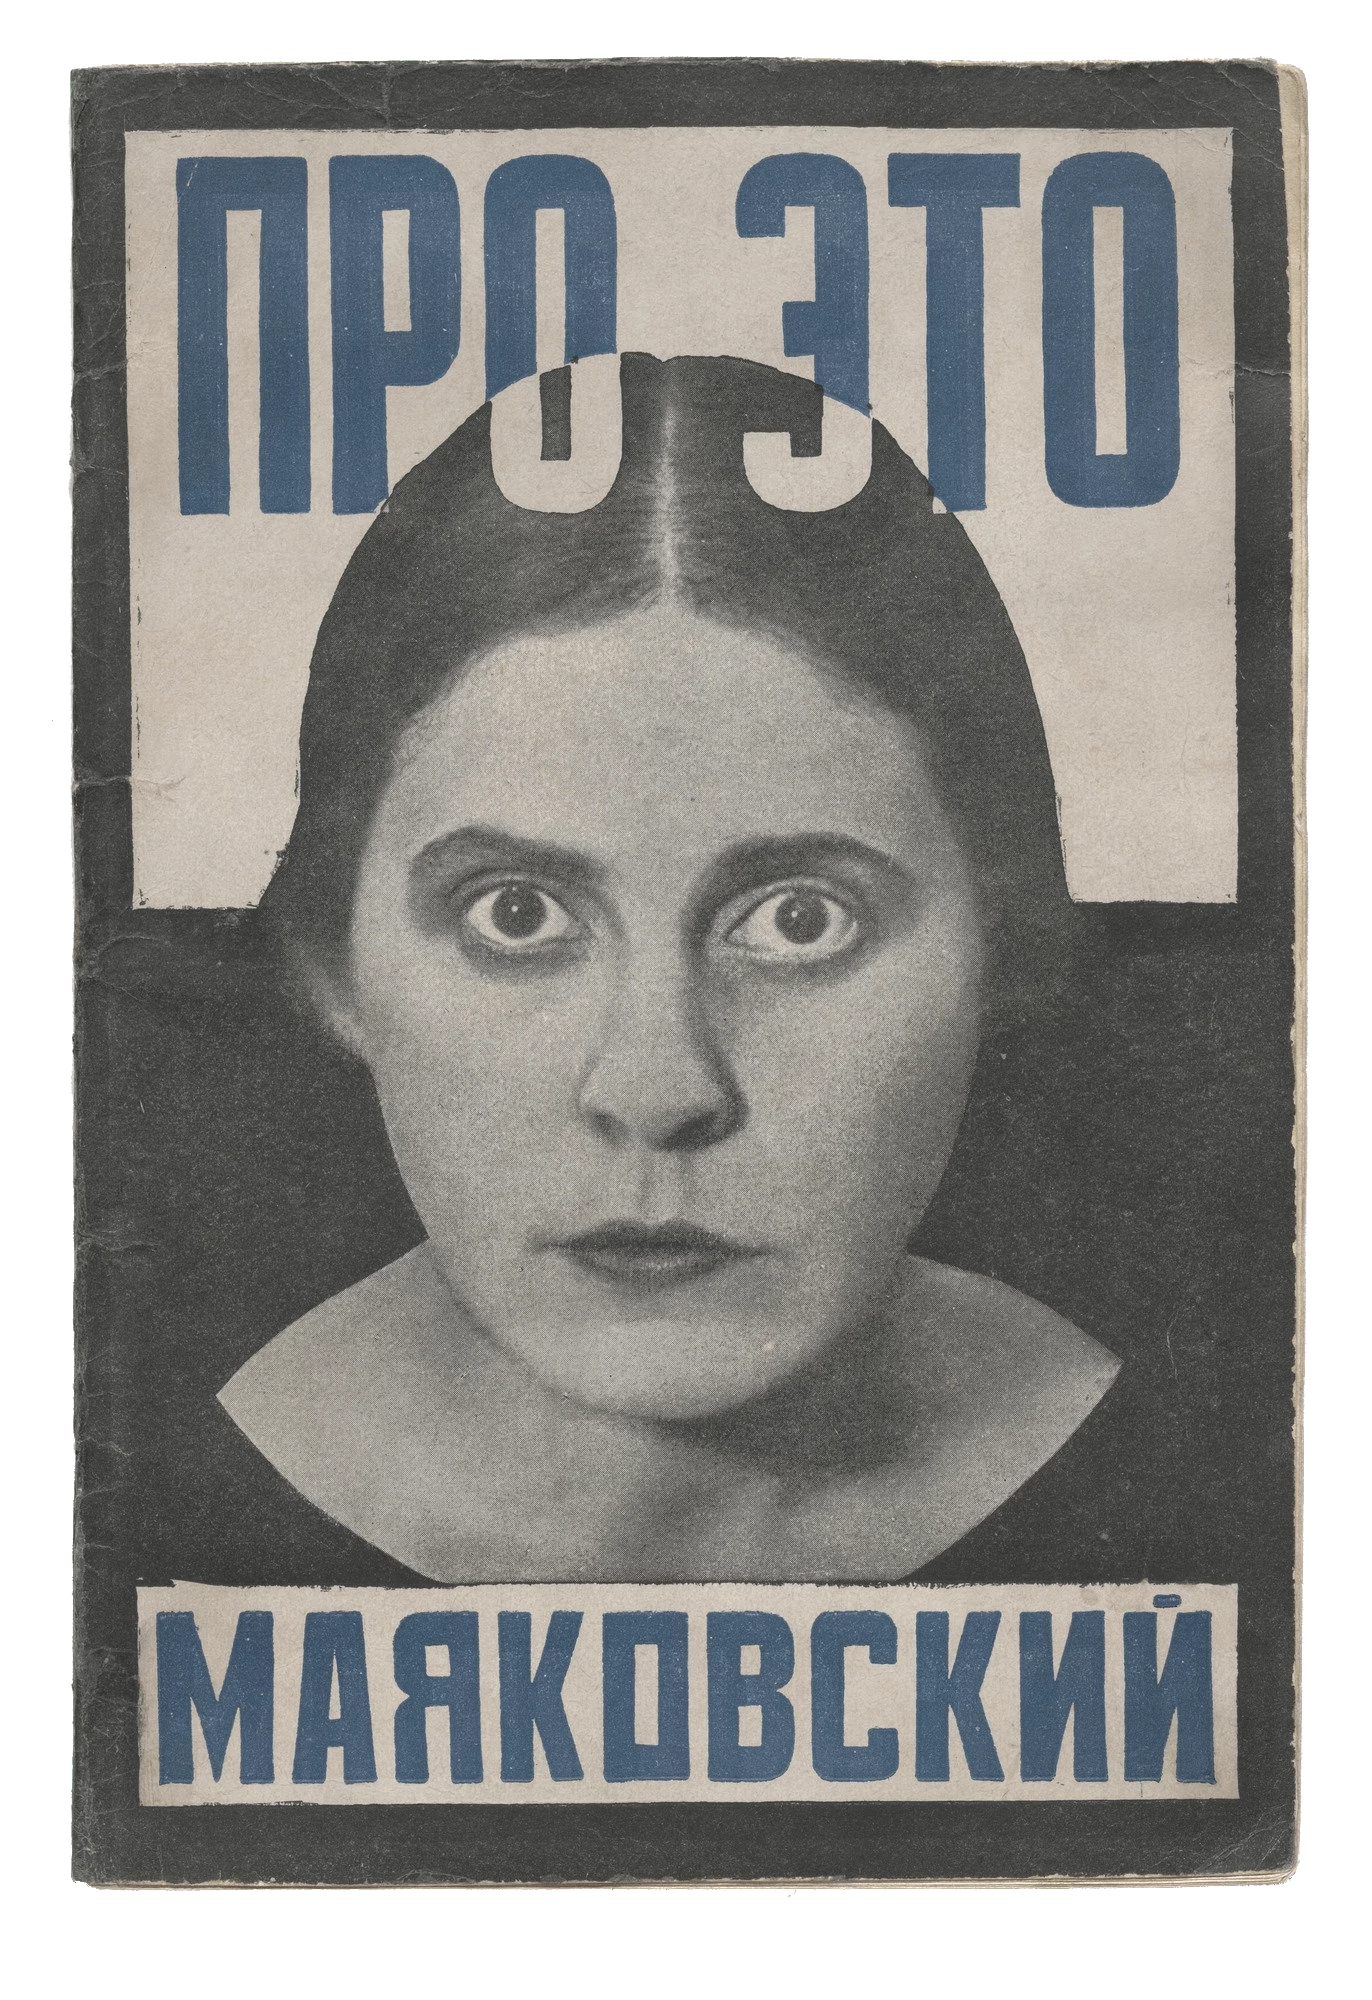 About This. To Her and to Me, Aleksandr Rodchenko